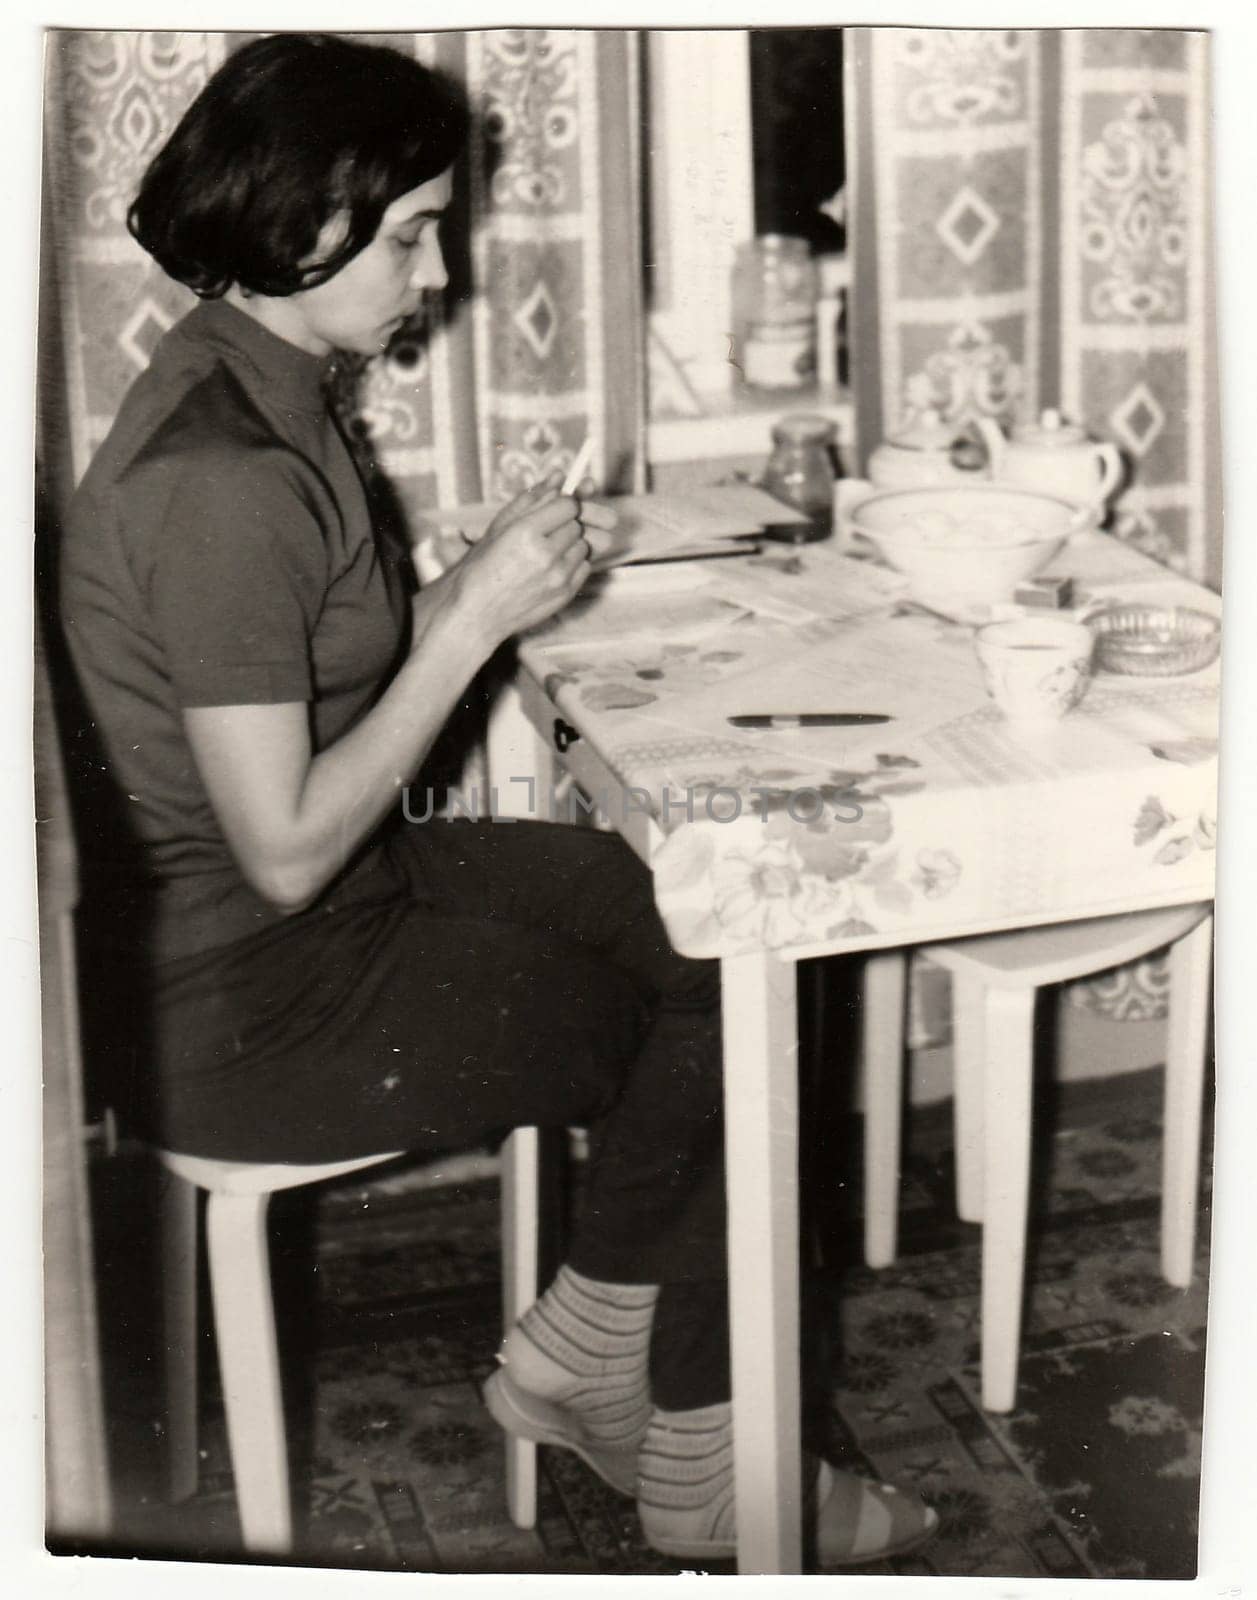 USSR - CIRCA 1970s: Vintage photo shows woman sittting at the table.